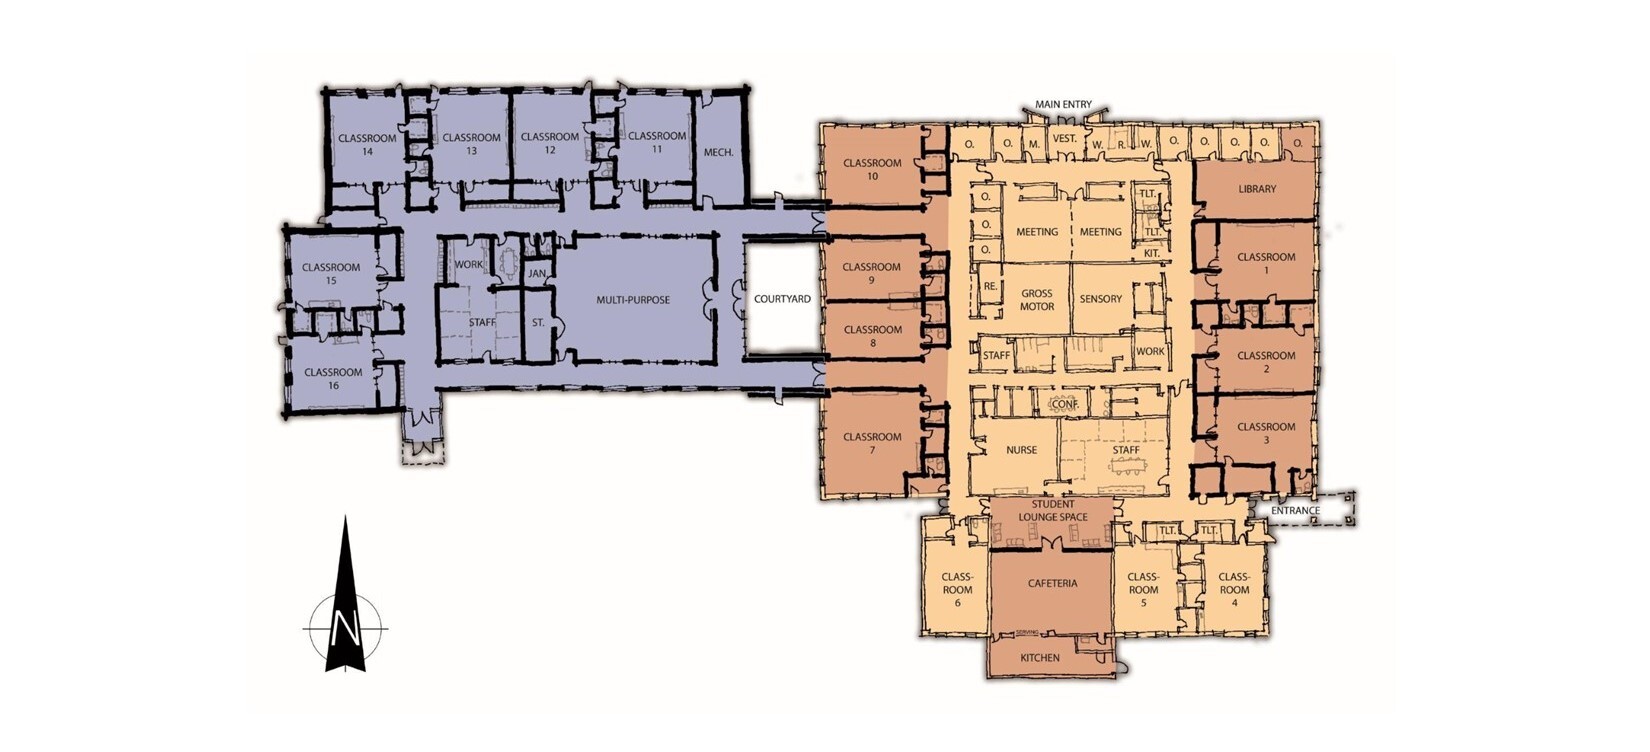 Proposed floor plan for the addition to Seiter Education Center